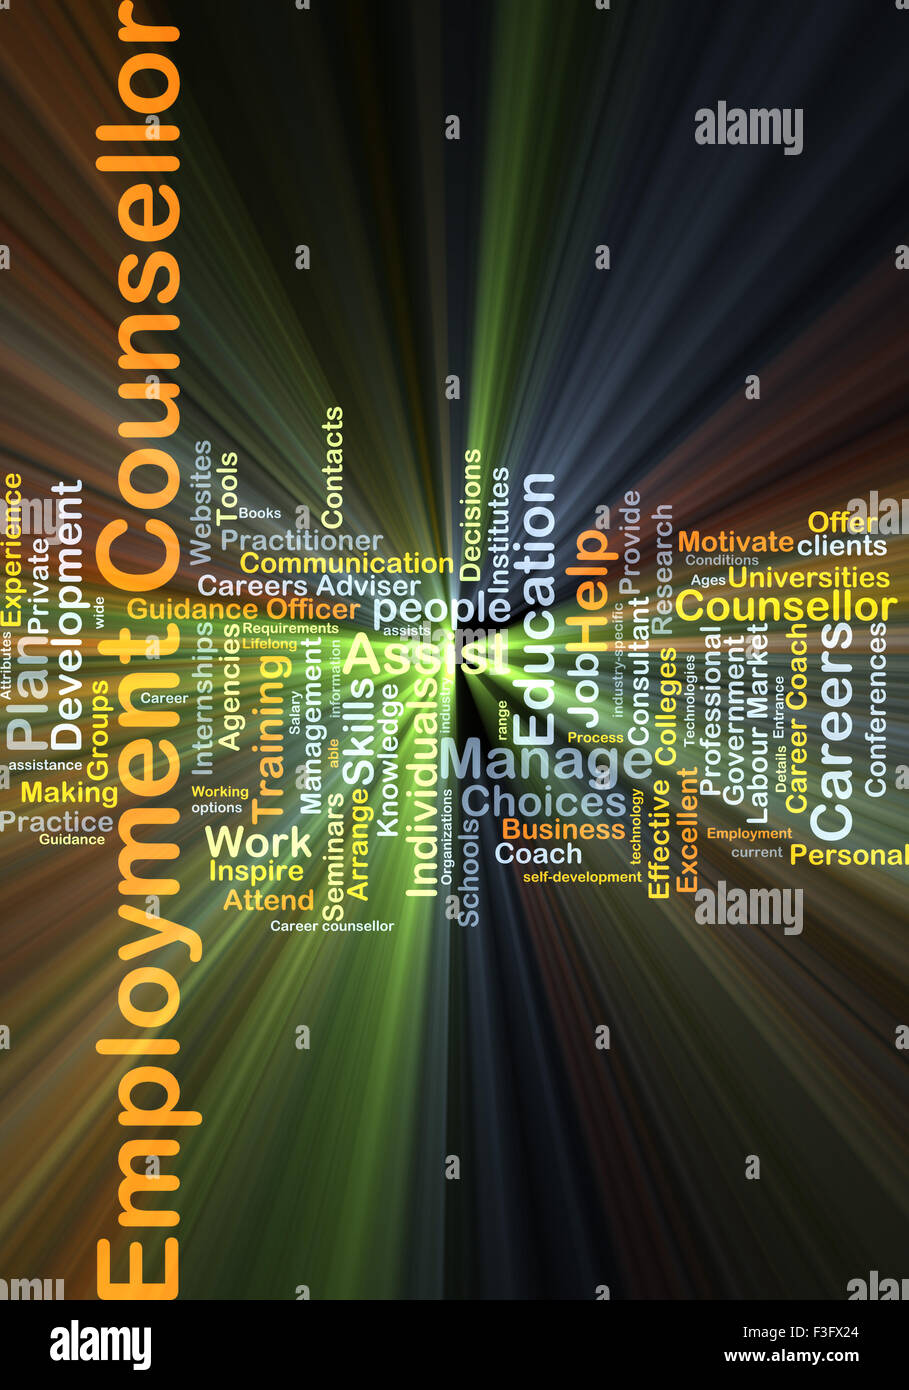 Background concept wordcloud illustration of employment consultant glowing light Stock Photo